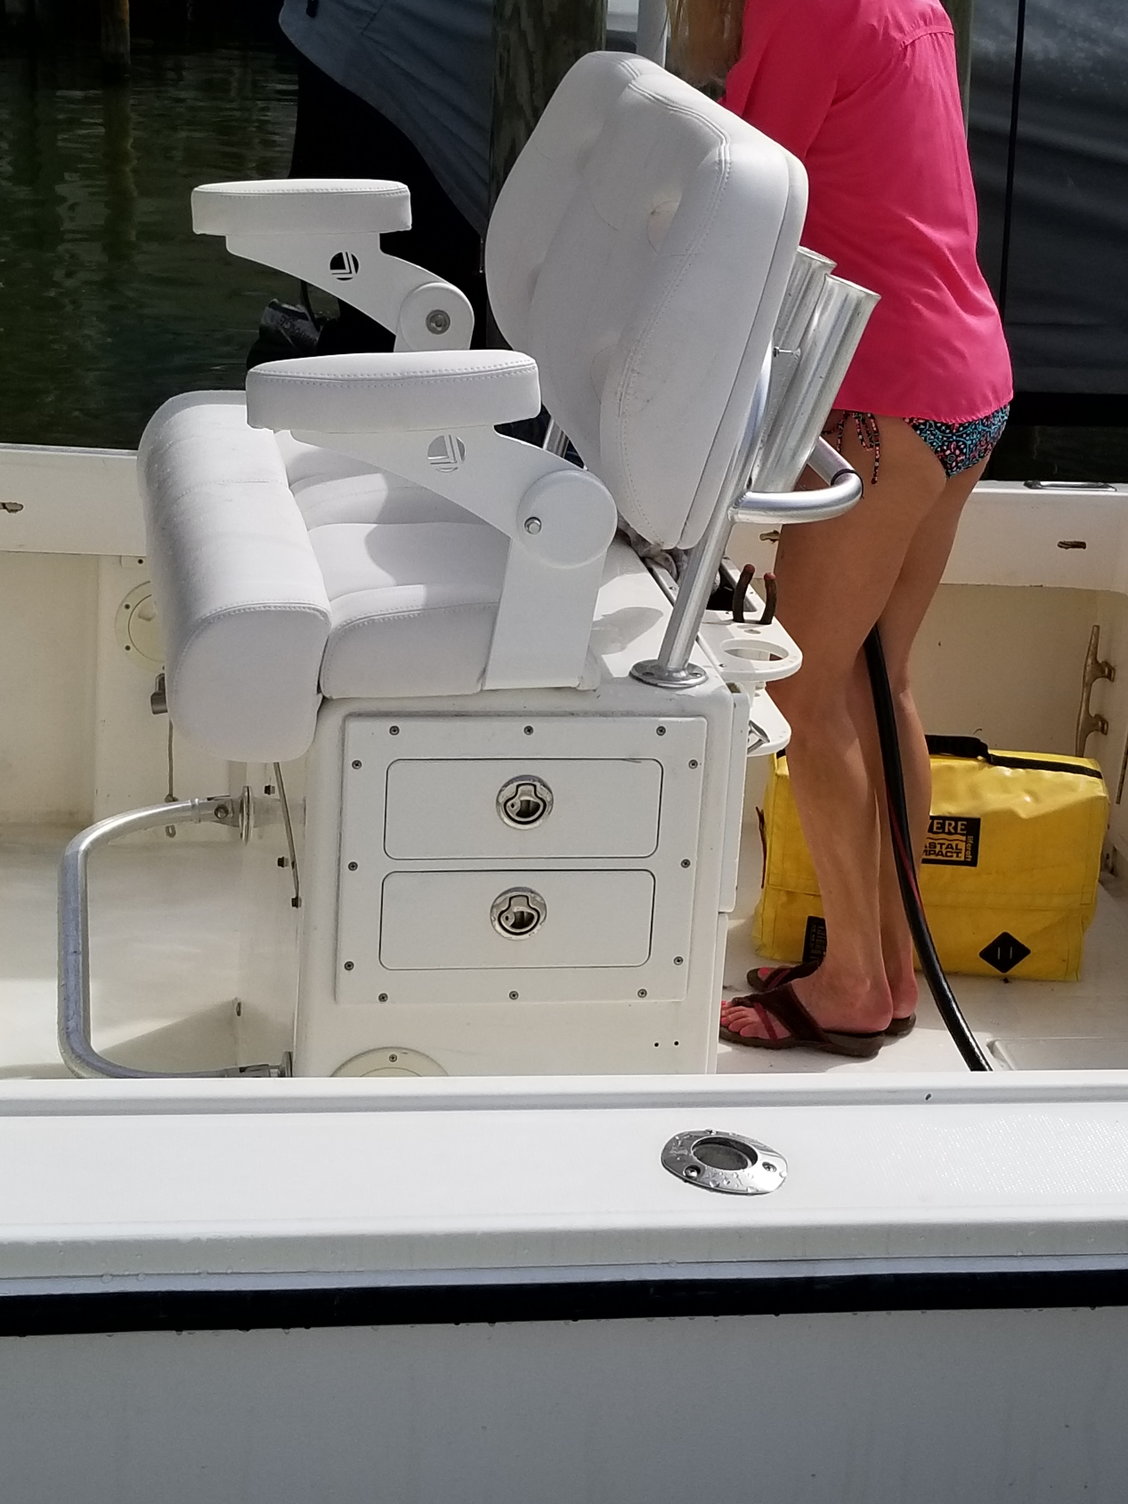 does ProLine have a Captains Chair? - The Hull Truth - Boating and Fishing  Forum